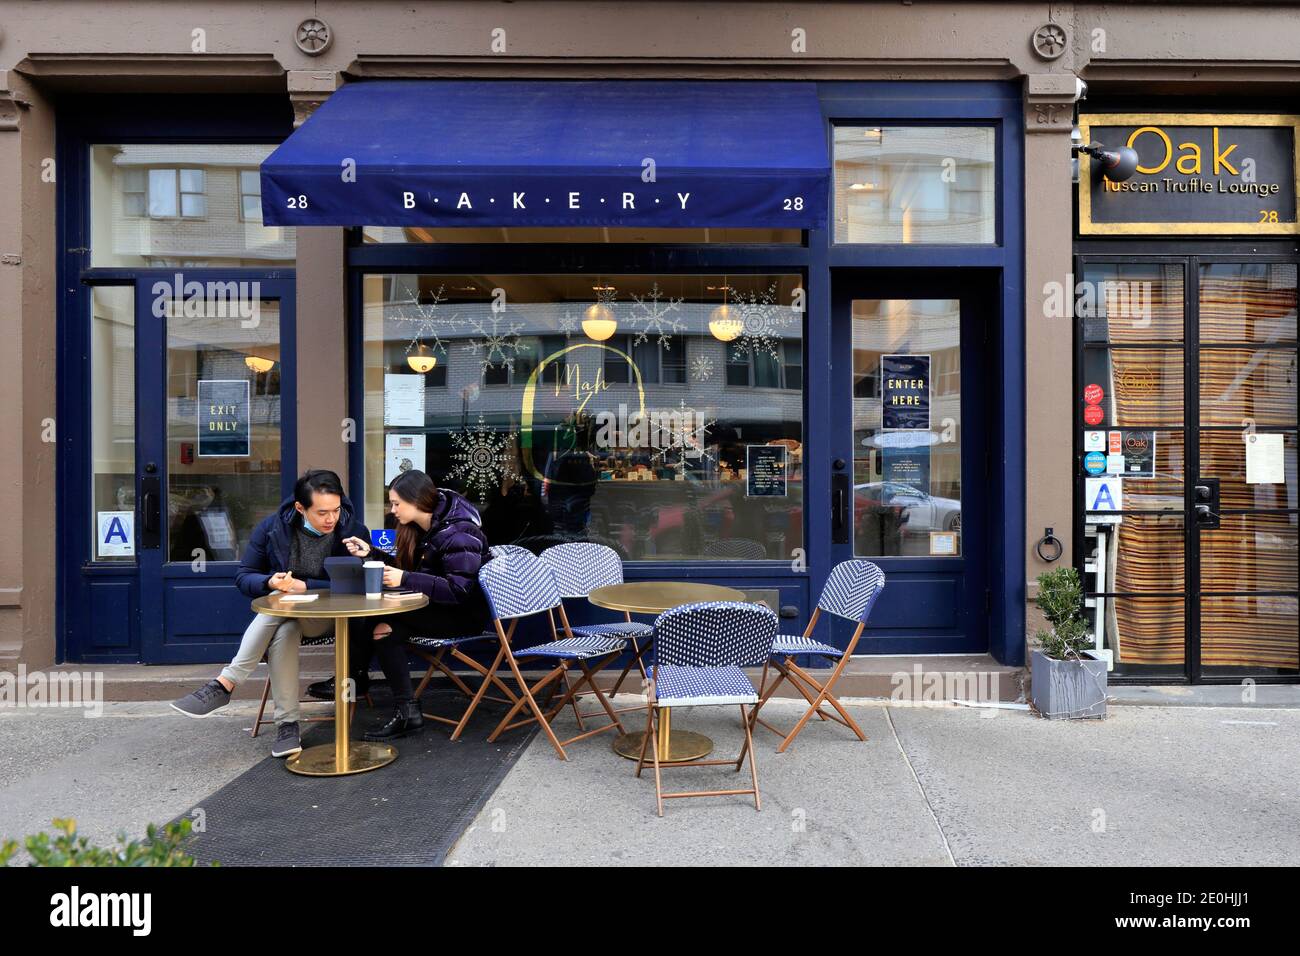 Mah-Ze-Dahr Bakery, 28 Greenwich Ave, New York, NYC storefront photo of a bakery and cafe in the Greenwich Village neighborhood of Manhattan Stock Photo